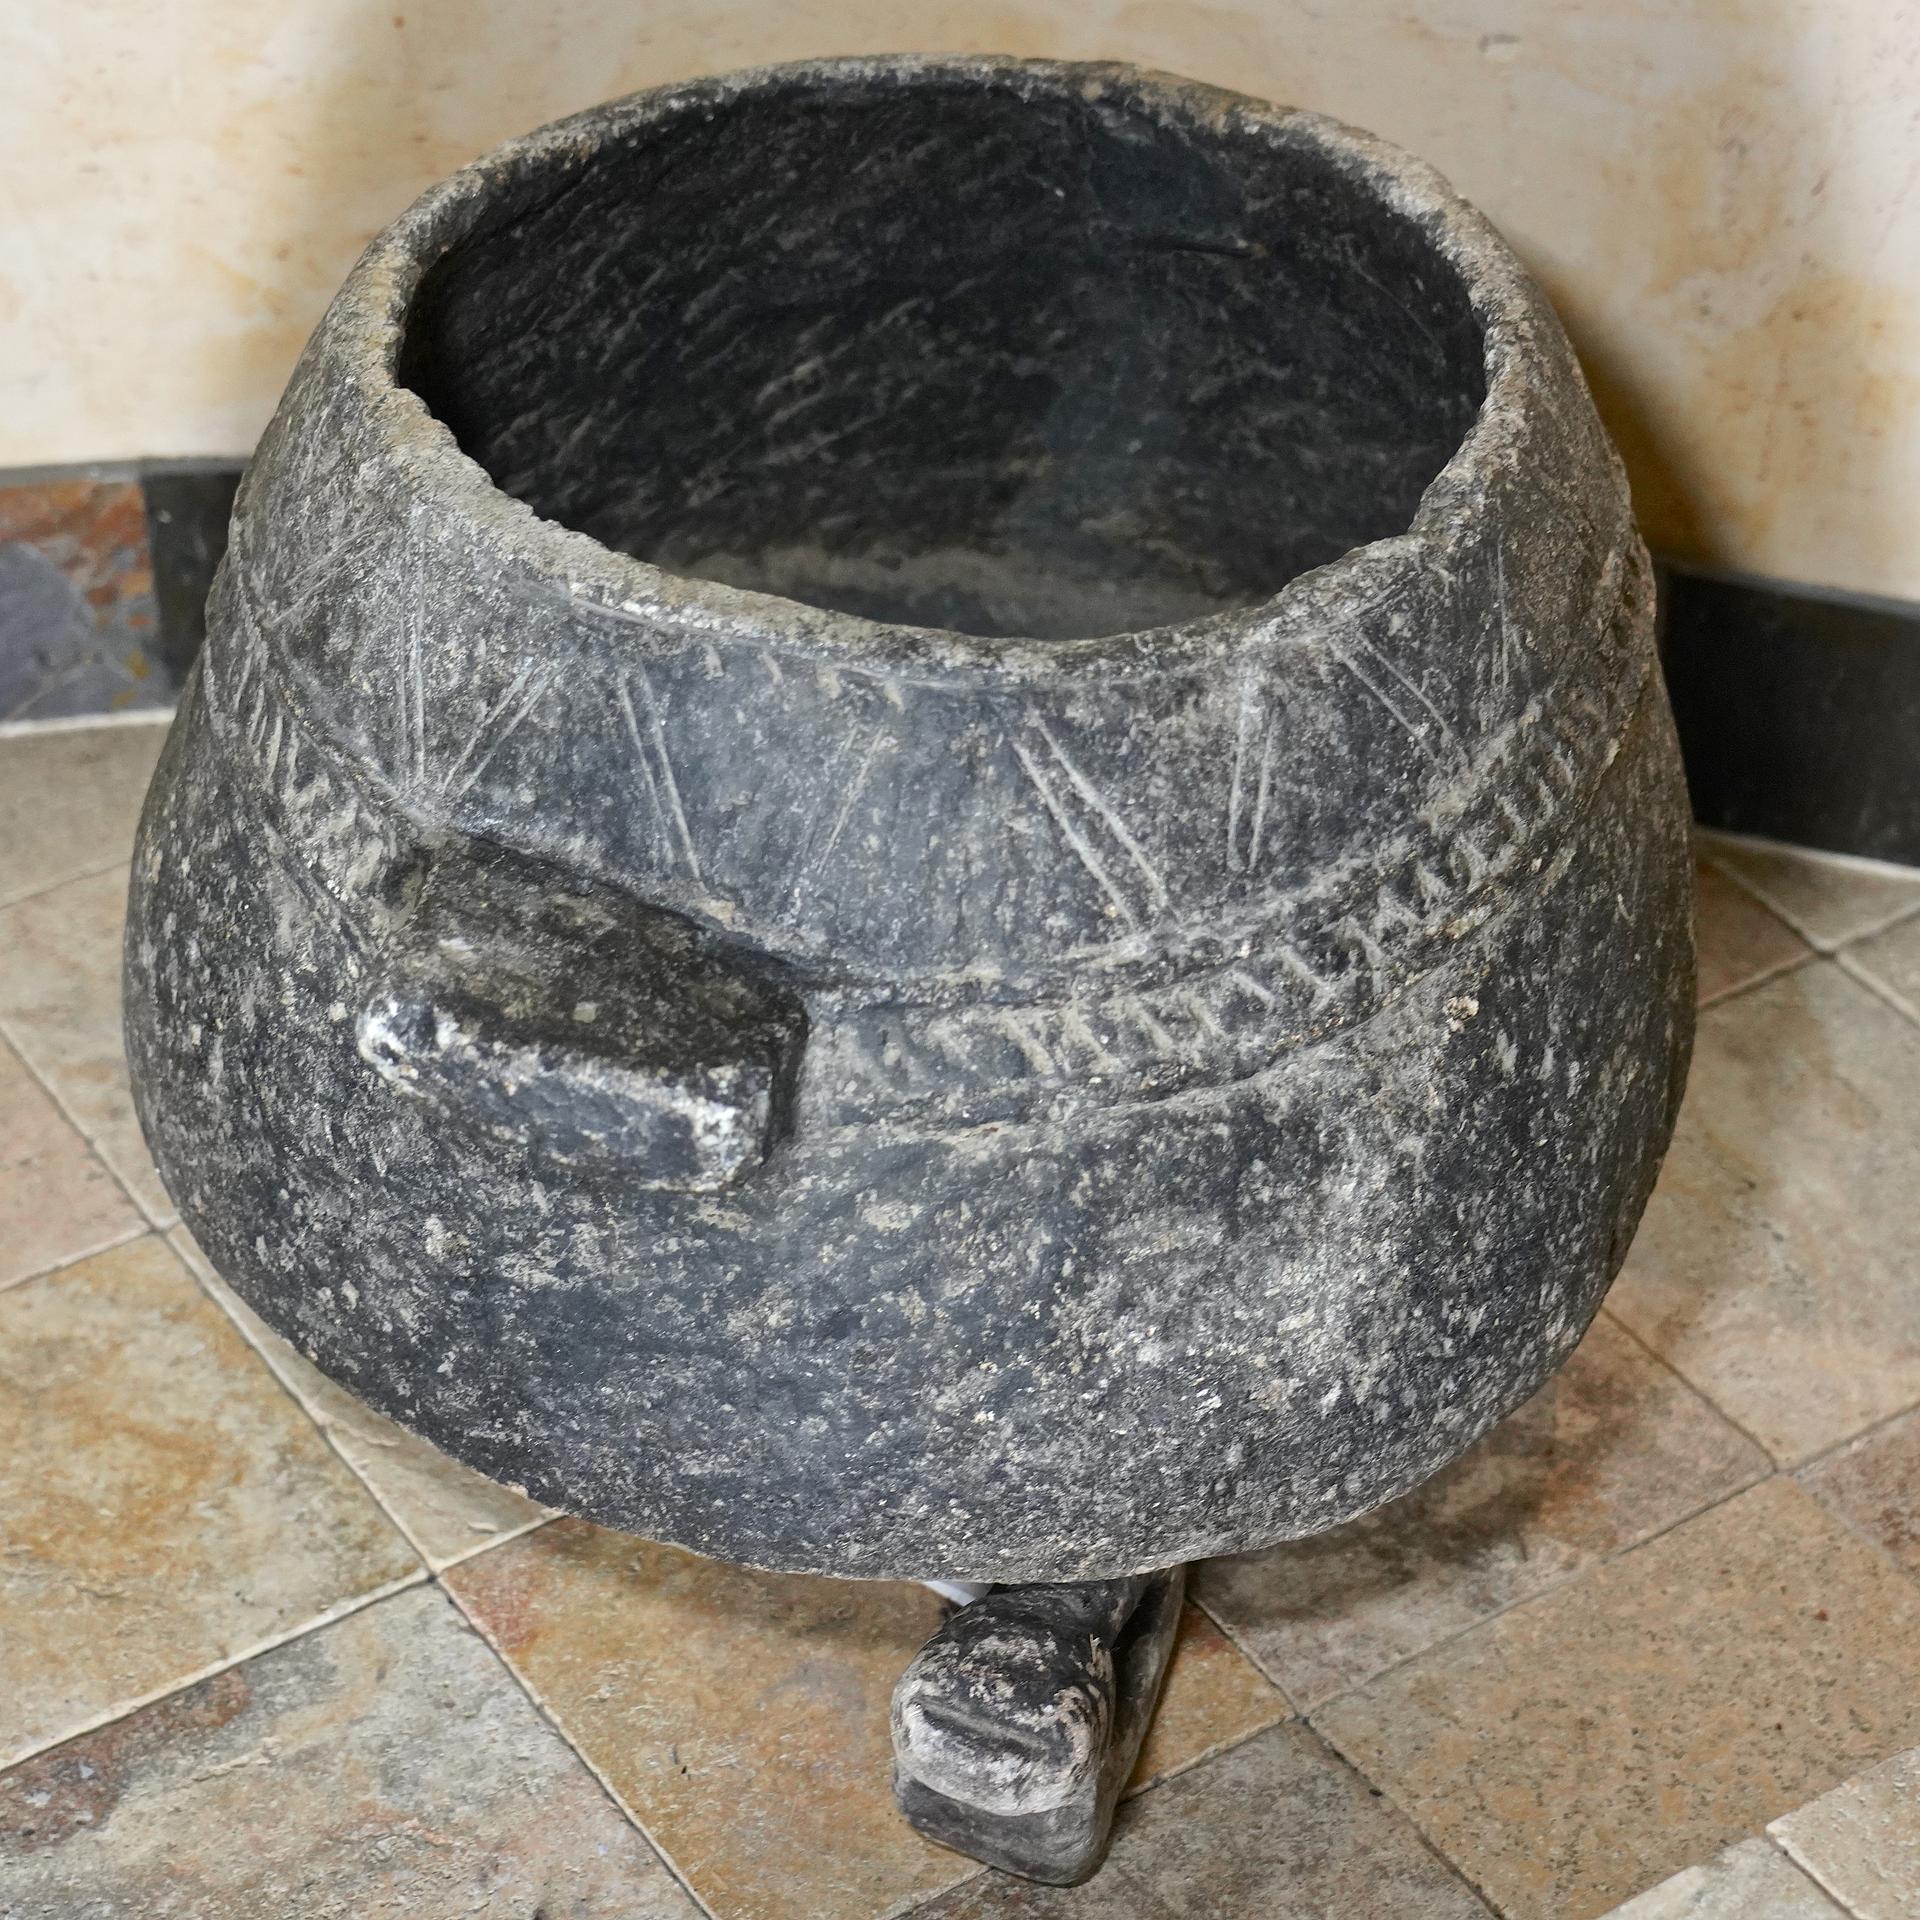 Stone cooking-pot from Afghanistan (14.04.2034) - Ethnic Design -  Collection Reto Zehnder